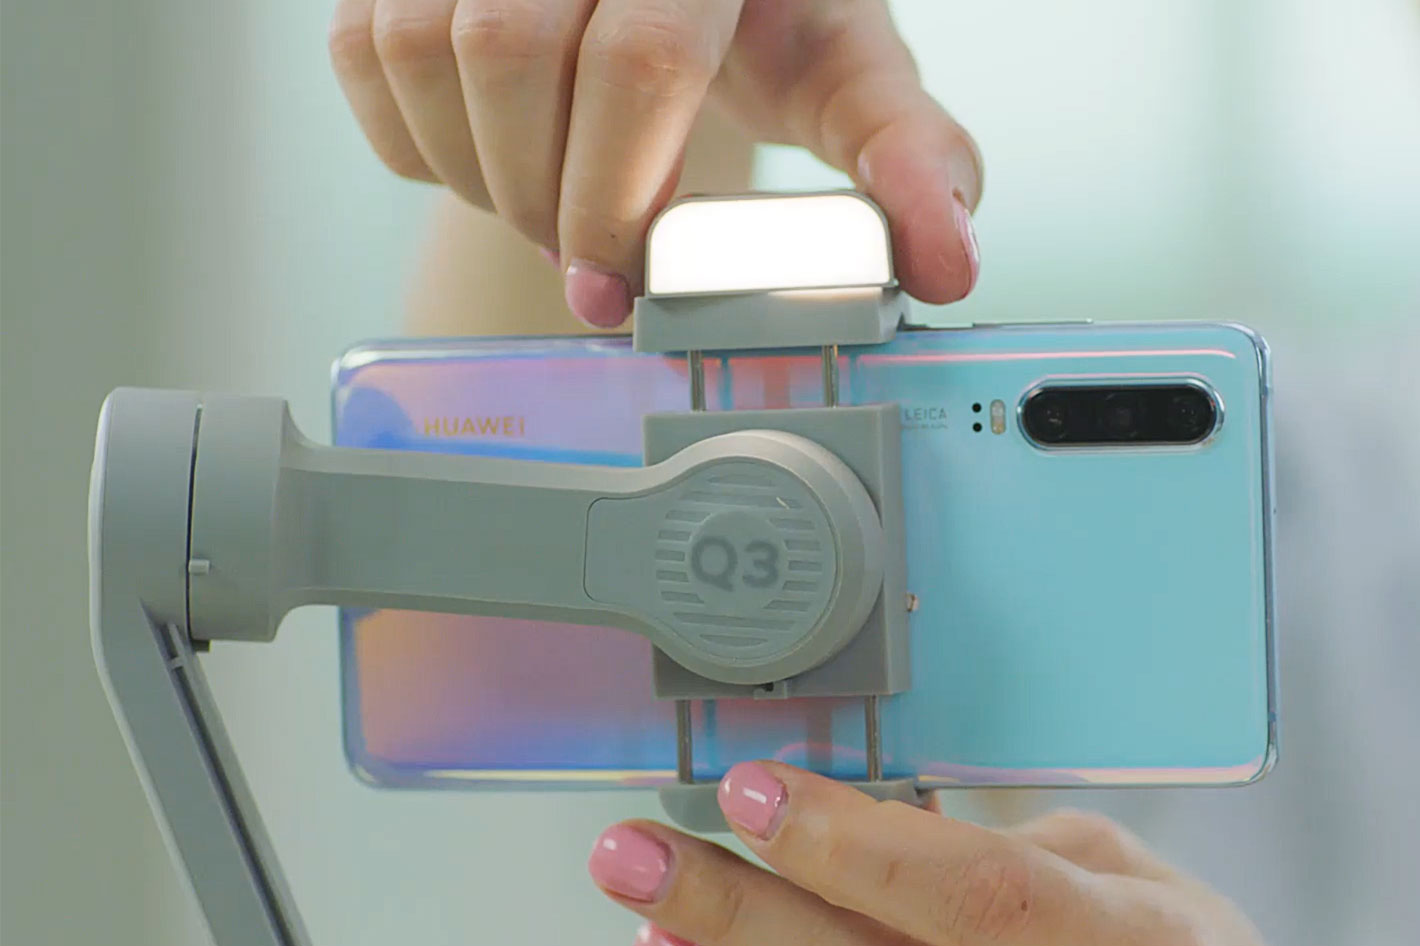 SMOOTH-Q3: a smartphone gimbal with integrated fill light